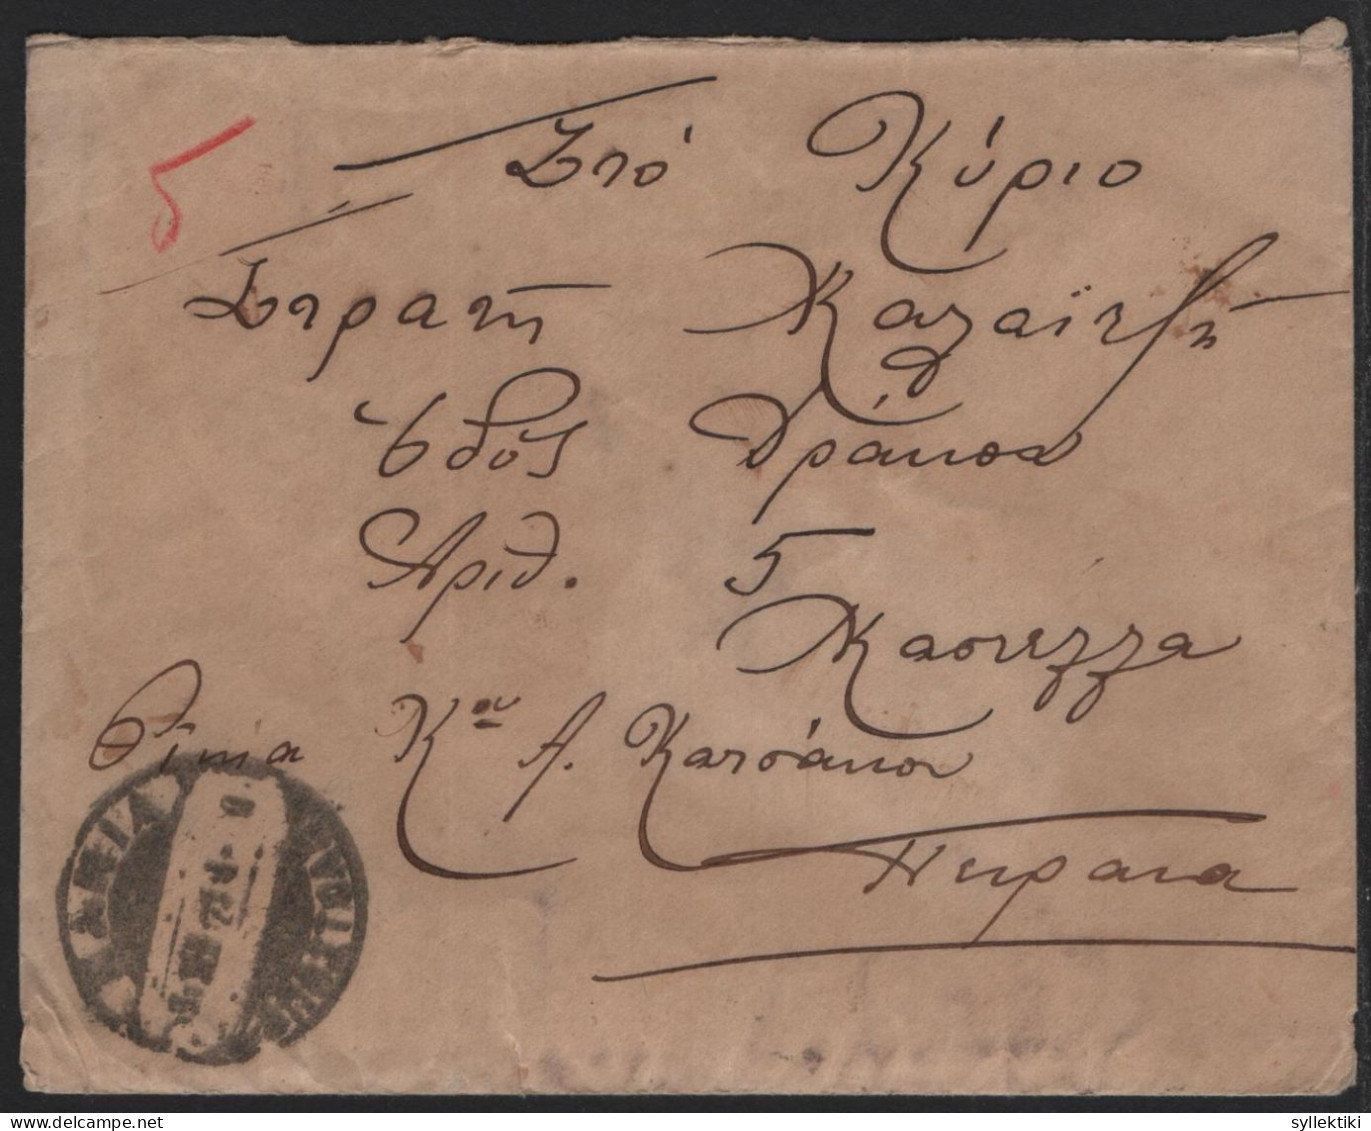 GREECE 1910s MAILED COVER FROM CRETE & 9 STAMPS ON - Lettres & Documents